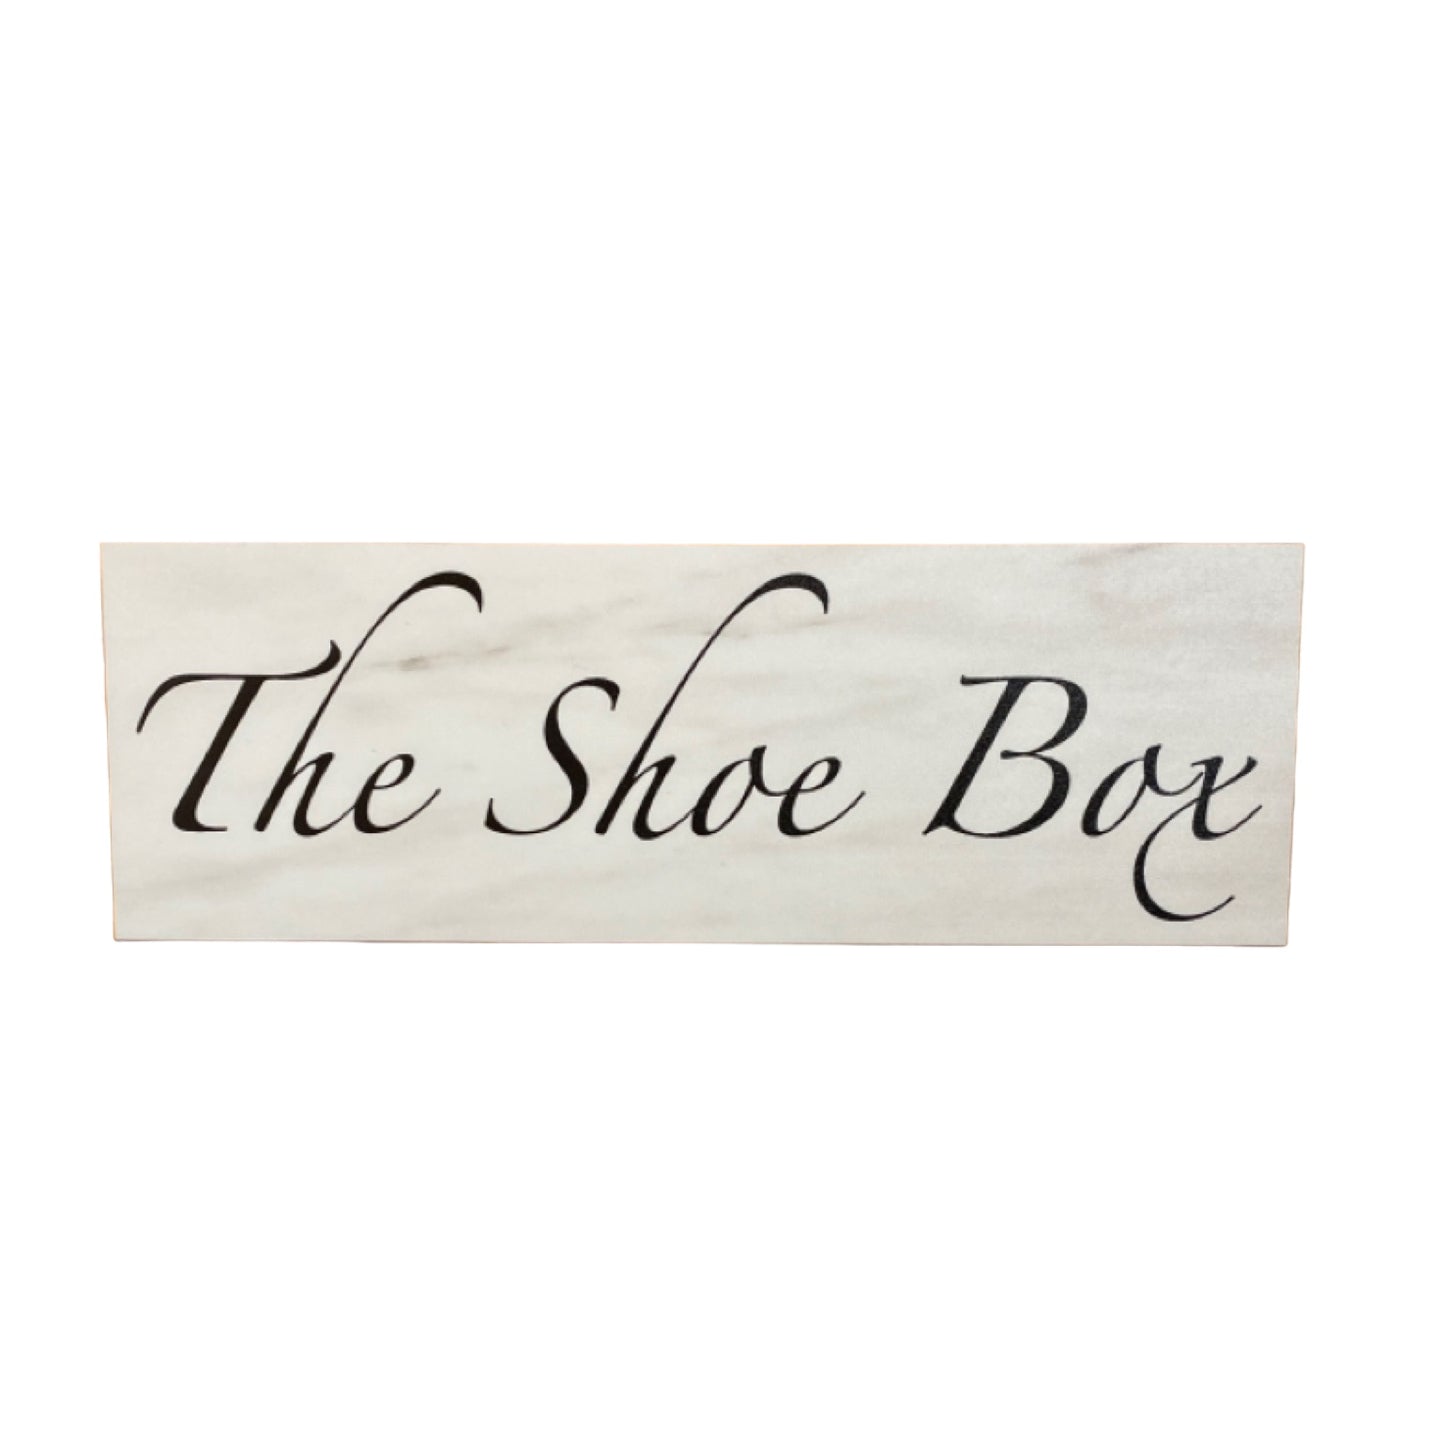 The Shoe Box Sign